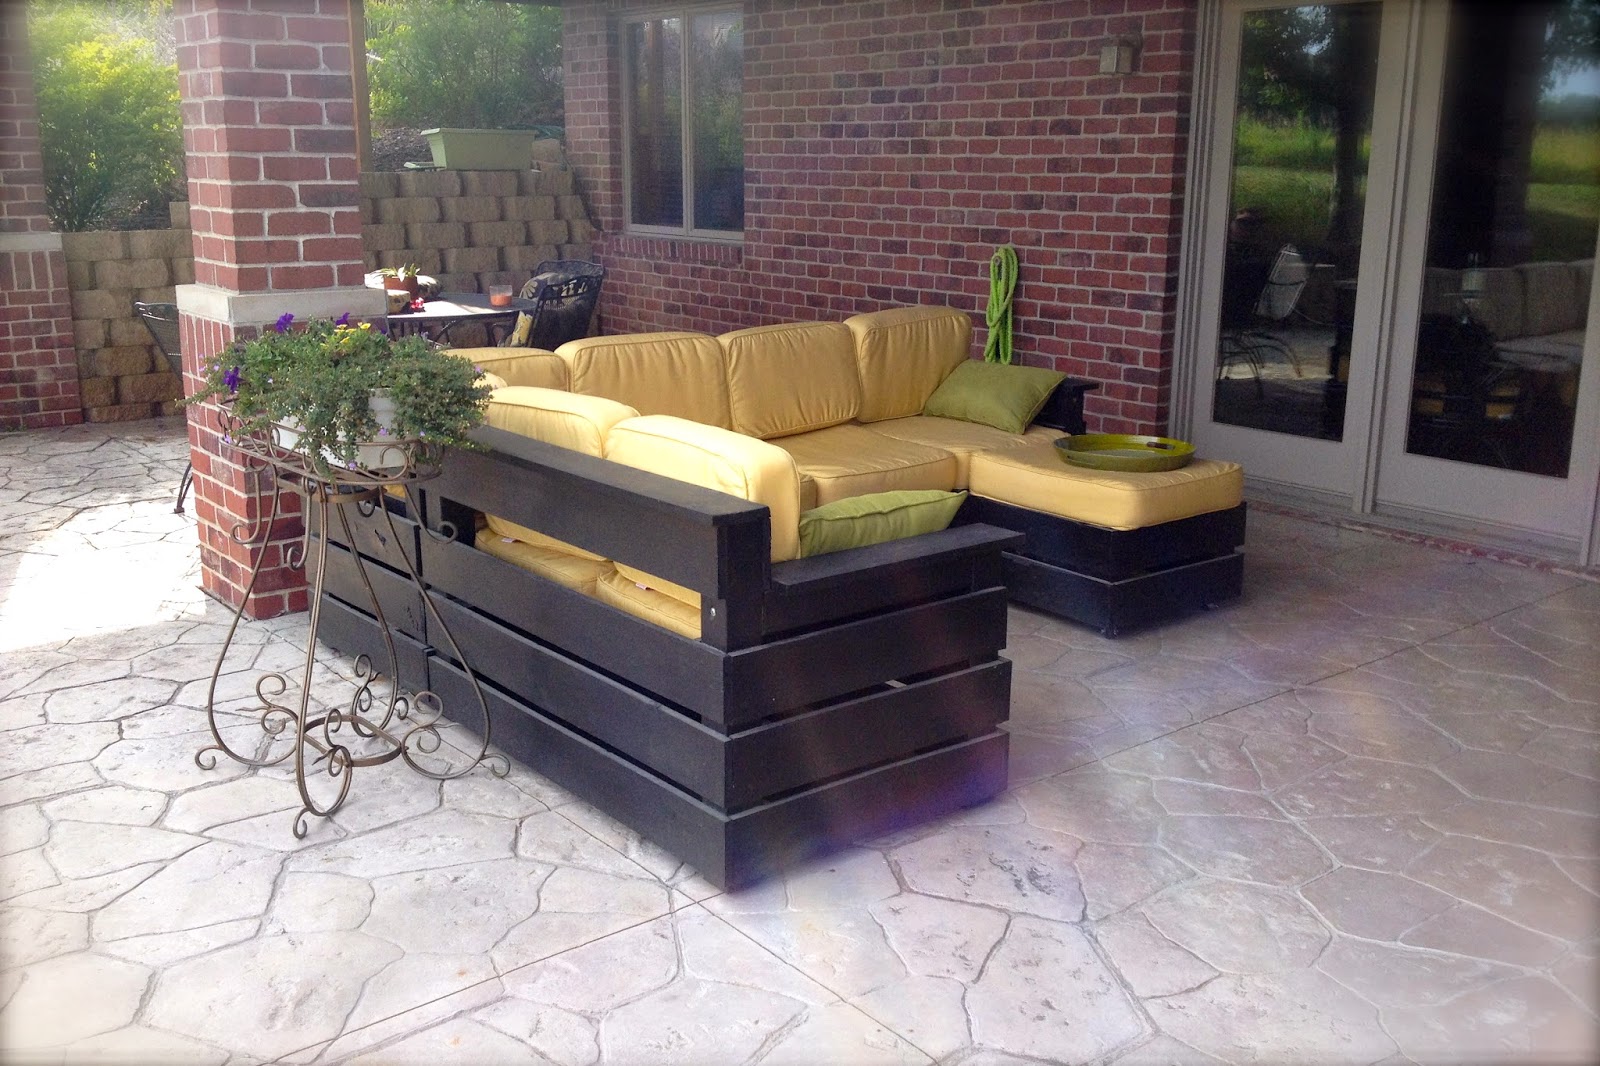 DIY Why Spend More: DIY Outdoor Sectional